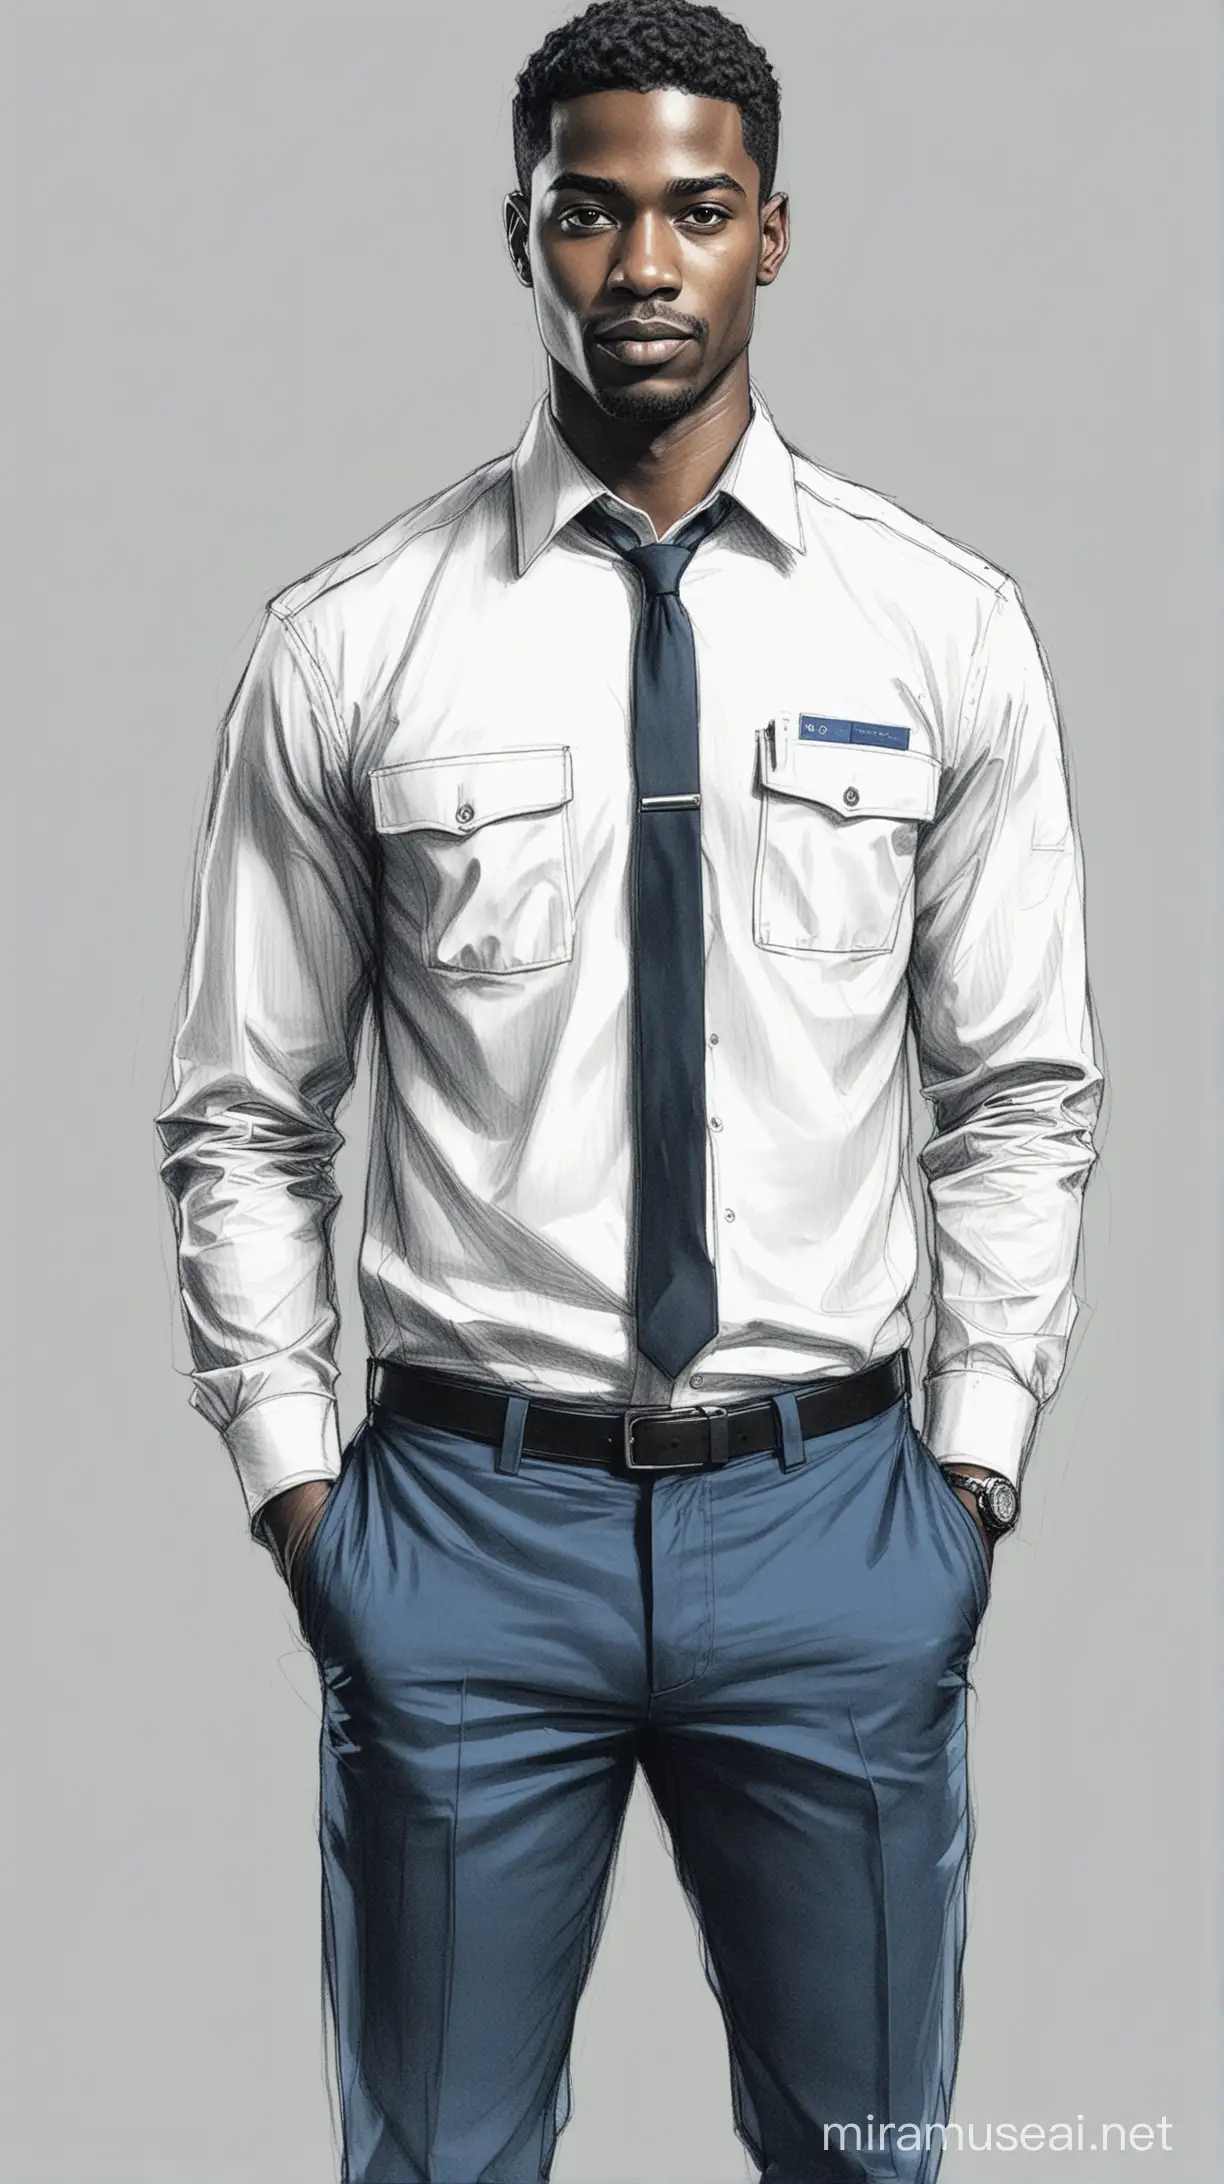 Airport Security Agent in Casual Uniform with Pockets and Comfortable Pants